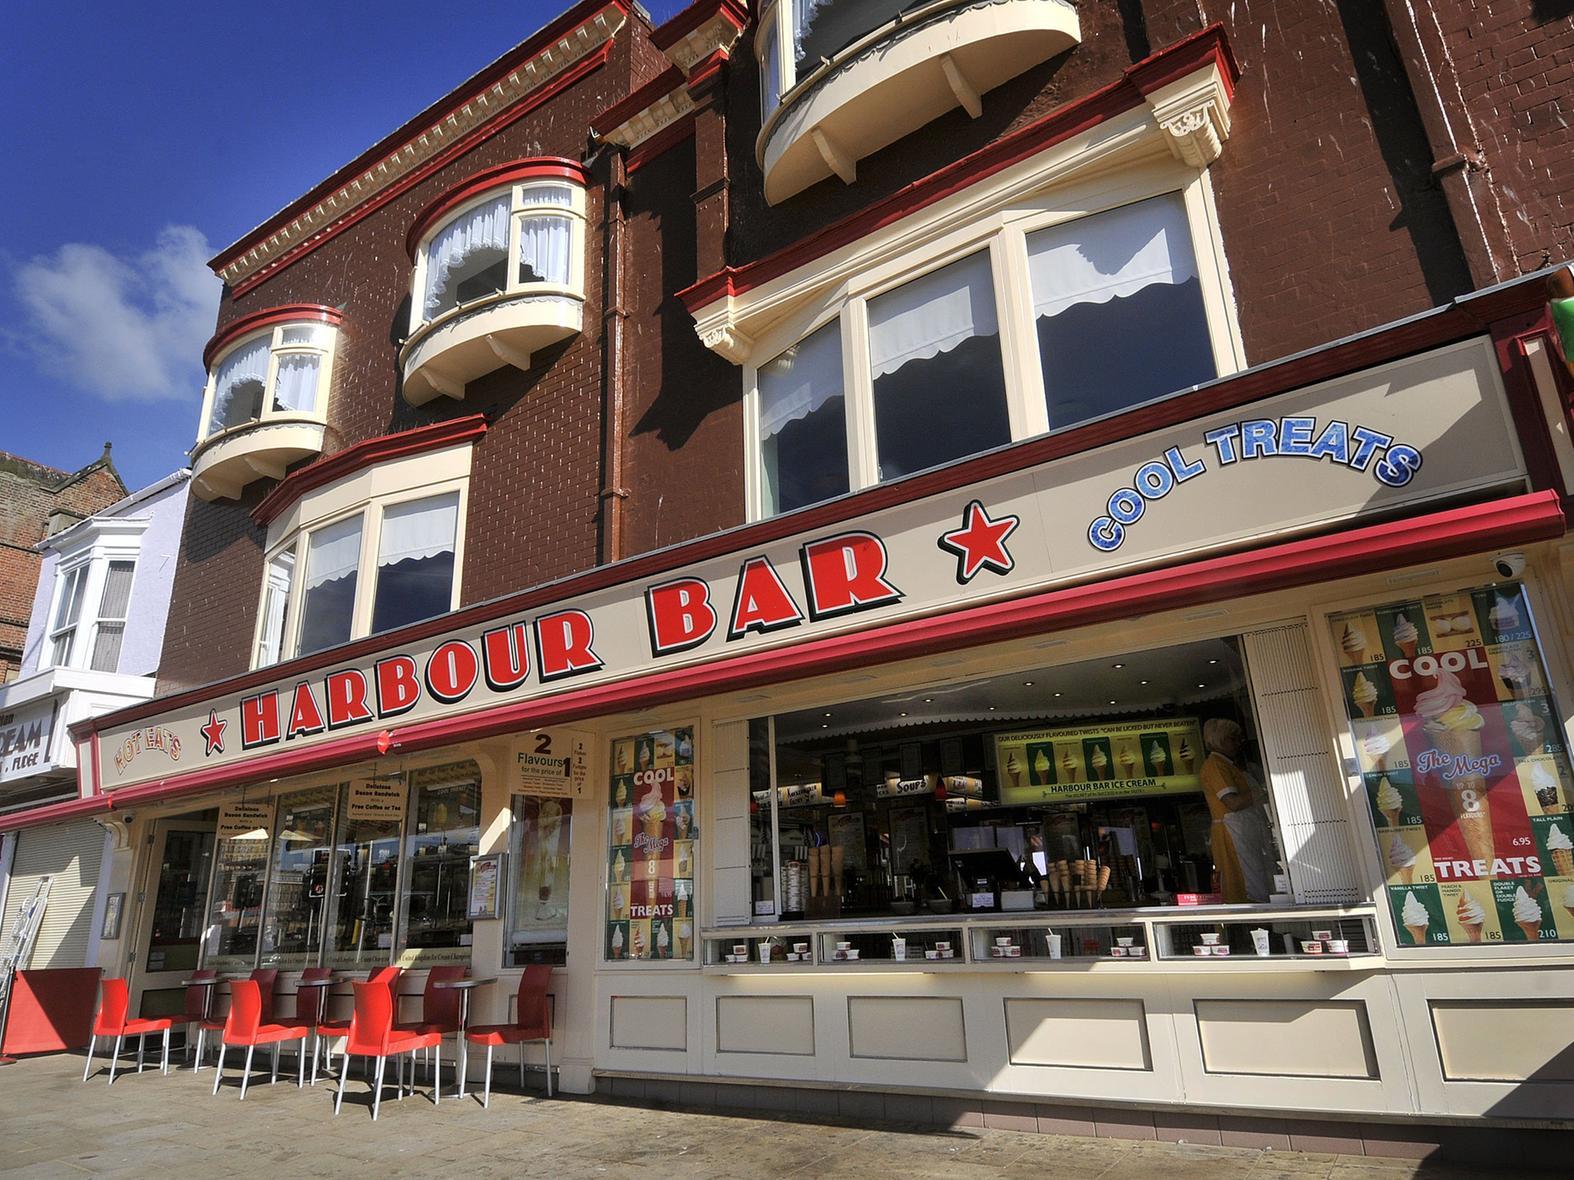 Every Scarborough local has a memory of the Harbour Bar which continues to be one of the towns most recognisable spots. Share a lemon top whilst you ask your partner to marry you.